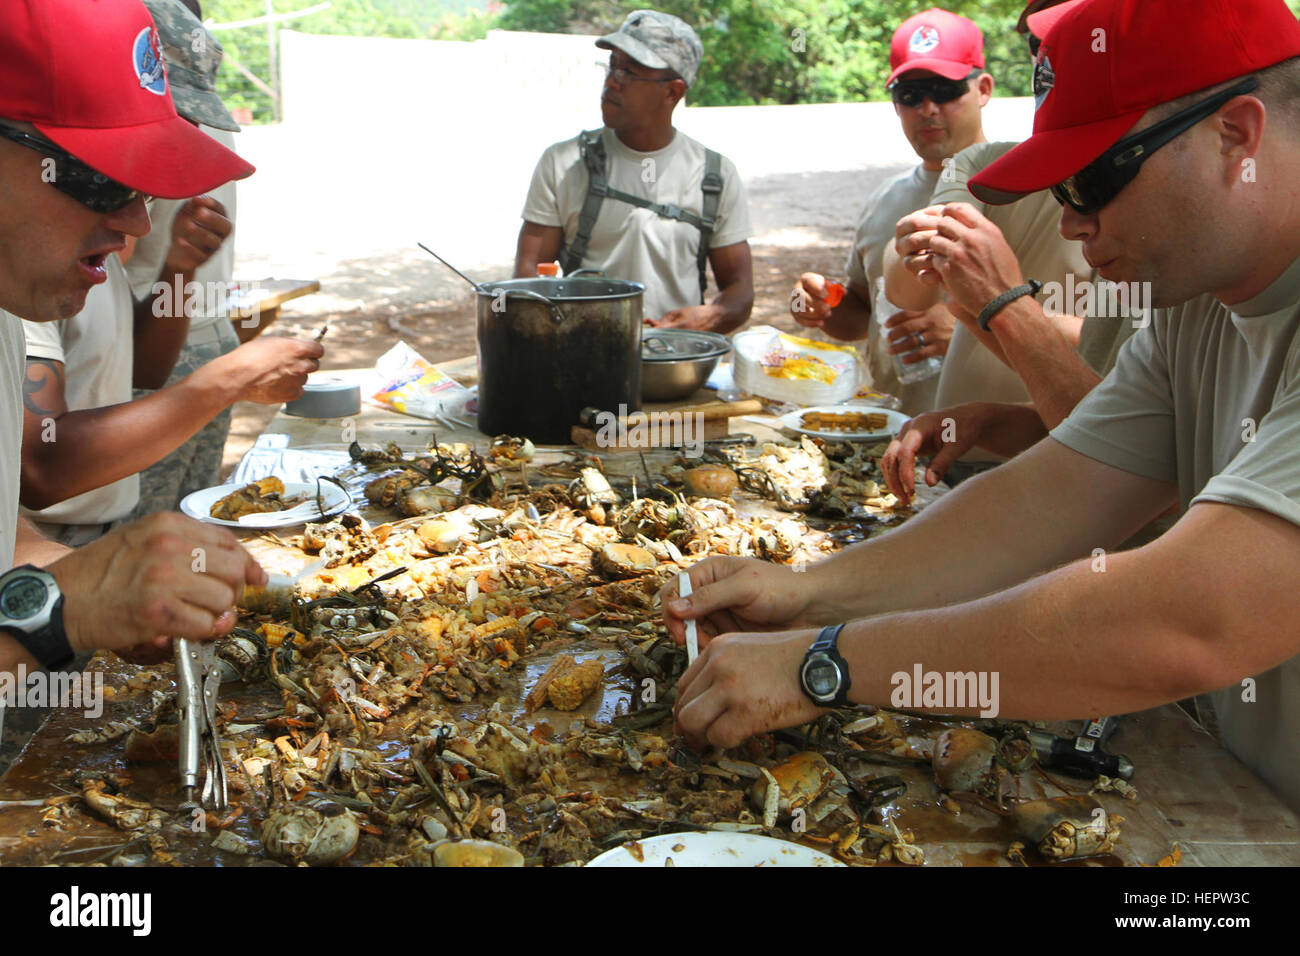 U.S. airmen and Soldiers feast on a crab boil cooked by residents of the village of La Guazara, Dominican Republic, as part of Beyond the Horizon 2014, a three-month multinational humanitarian exercise, June 7, 2014. The airmen in the red ball caps are part of the Air National Guard's 200th and 210th RED HORSE (Rapid Engineer Deployed Heavy Operational Repair Squadron Engineers) Squadrons from Ohio and New Mexico and are on a two-week rotation to finish up construction on a school in the village. Beyond the Horizon 2014 140607-A-JF456-128 Stock Photo